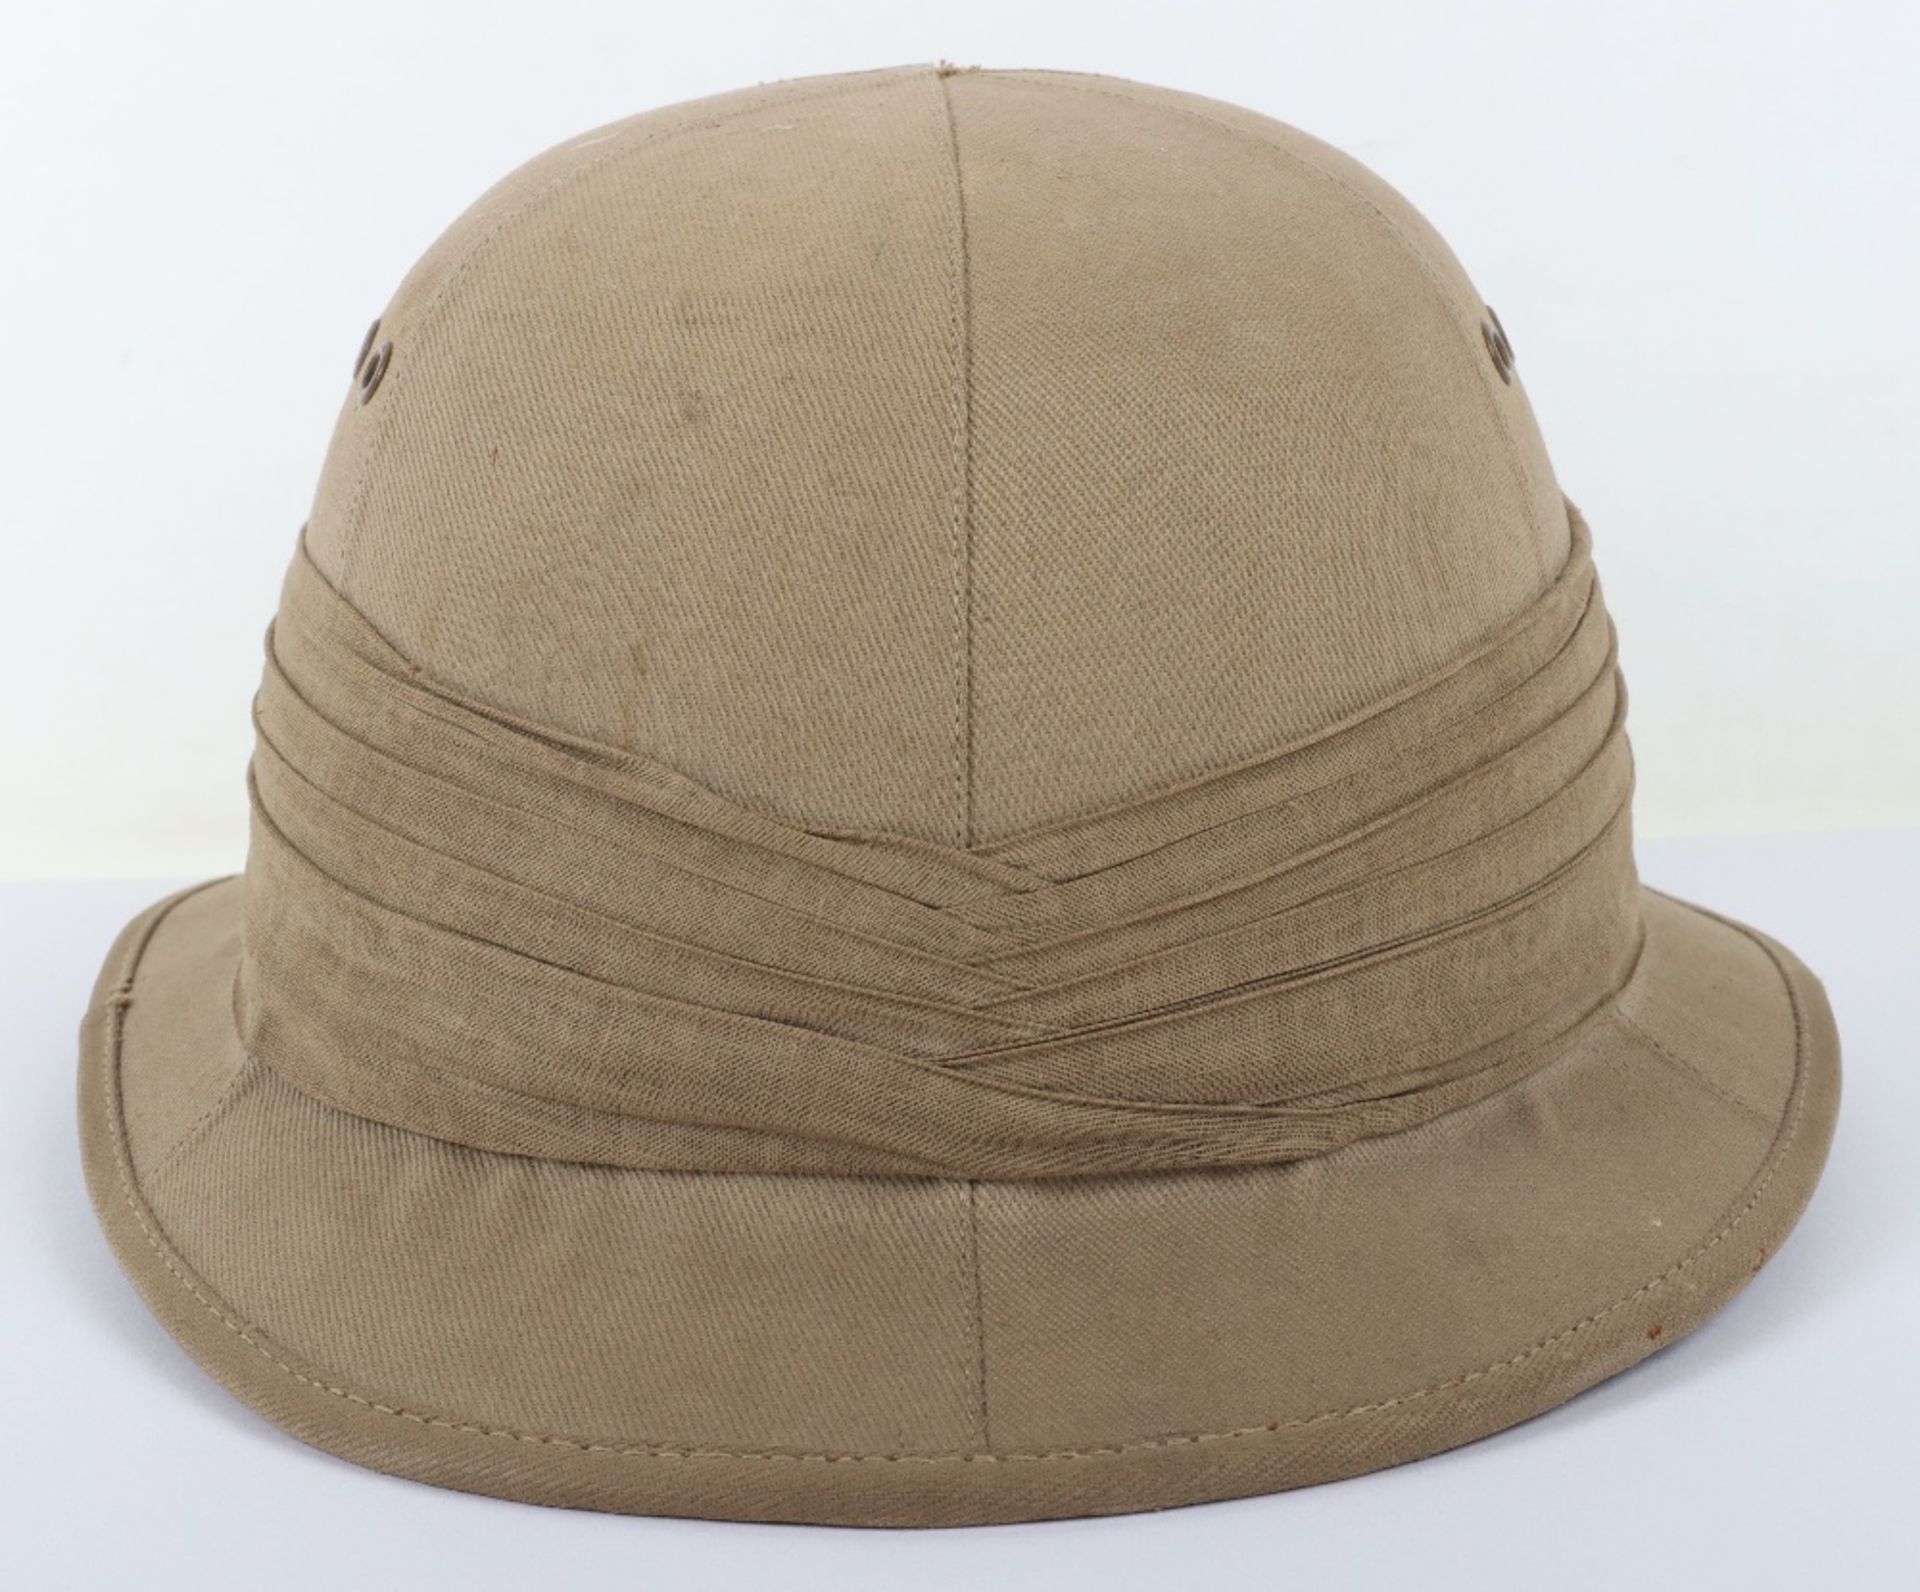 1942 Foreign Service Helmet - Image 7 of 7